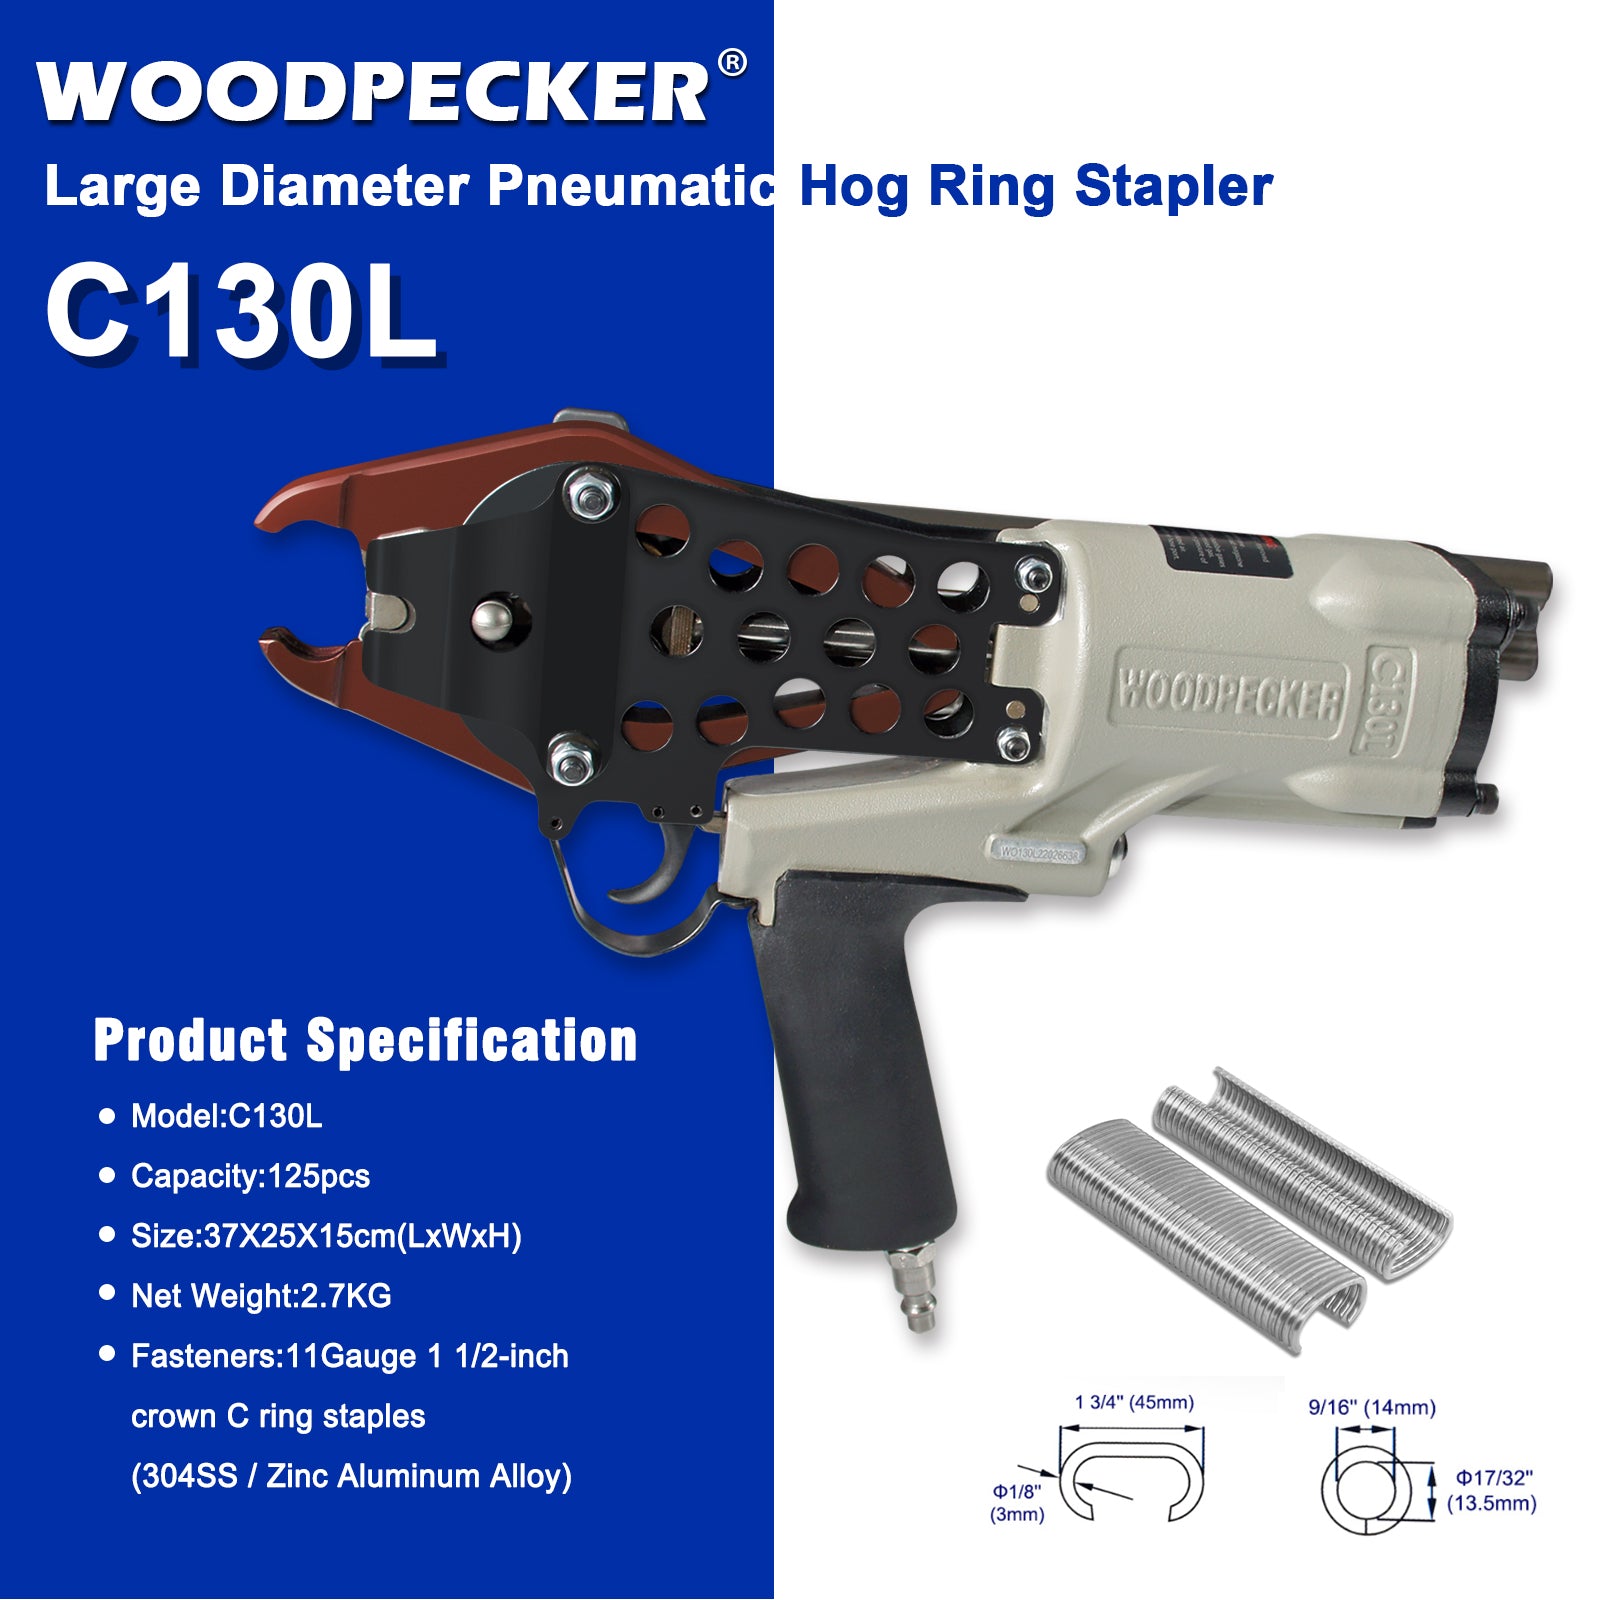 WOODPECKER C130L 11 Gauge Heavy-Duty Pneumatic Hog Ring Stapler, 13-14mm Closure Diameter, 1 1/2-Inch Crown, Lightweight and Powerful C Ring Gun for Border Fencing, Gabion, and Cages Building